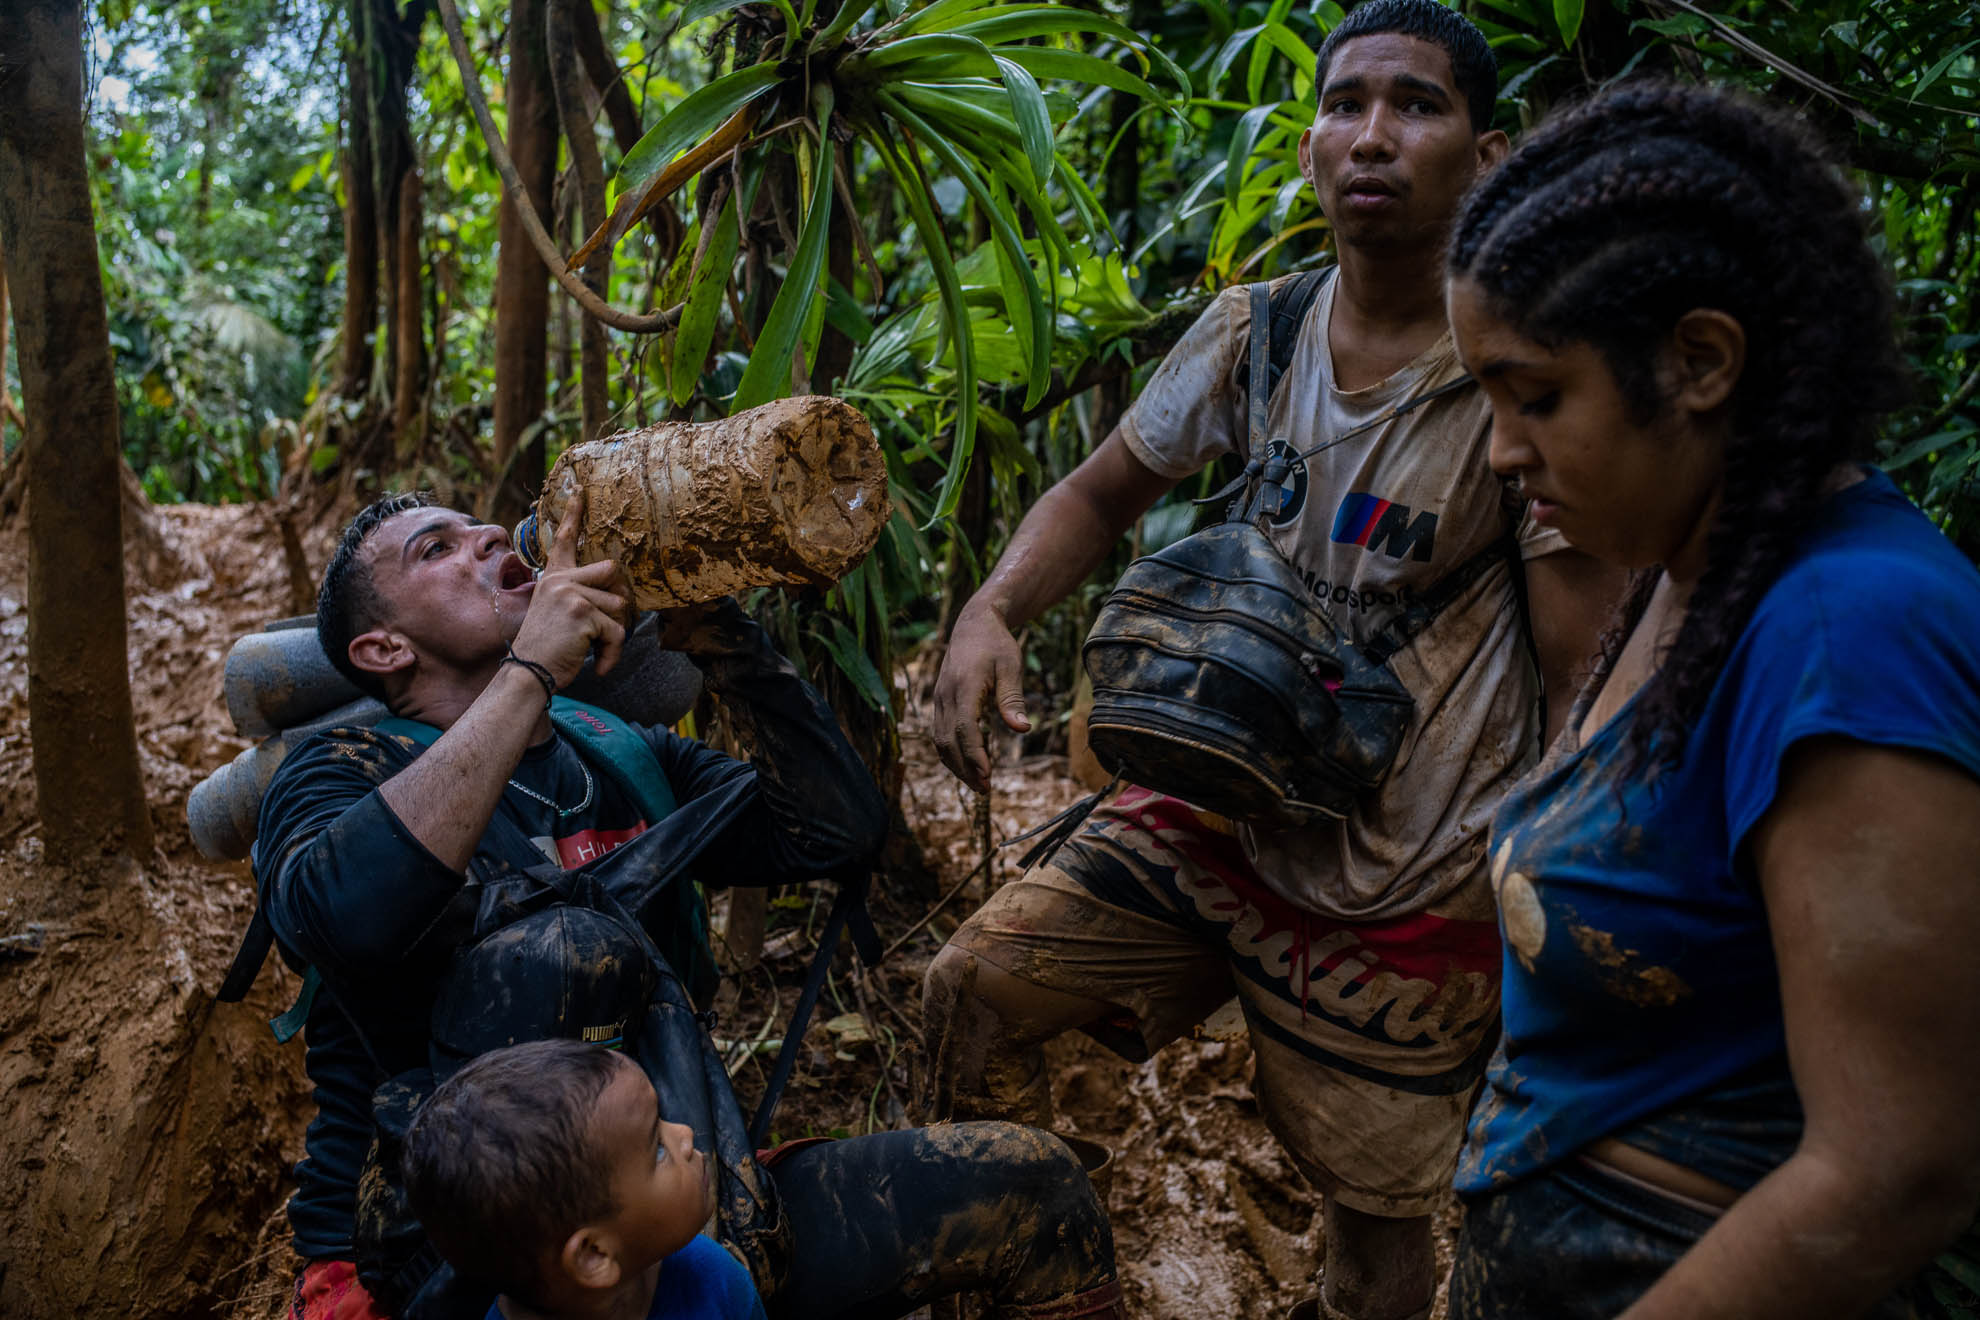 A man takes the last sip of water from a bottle covered in mud. Migrants leaving from Capurganá in Colombia try to bring food and water with them for the journey. However, after several days of trekking through the jungle and as they advance along the way, food supplies become scarce. October 2022.